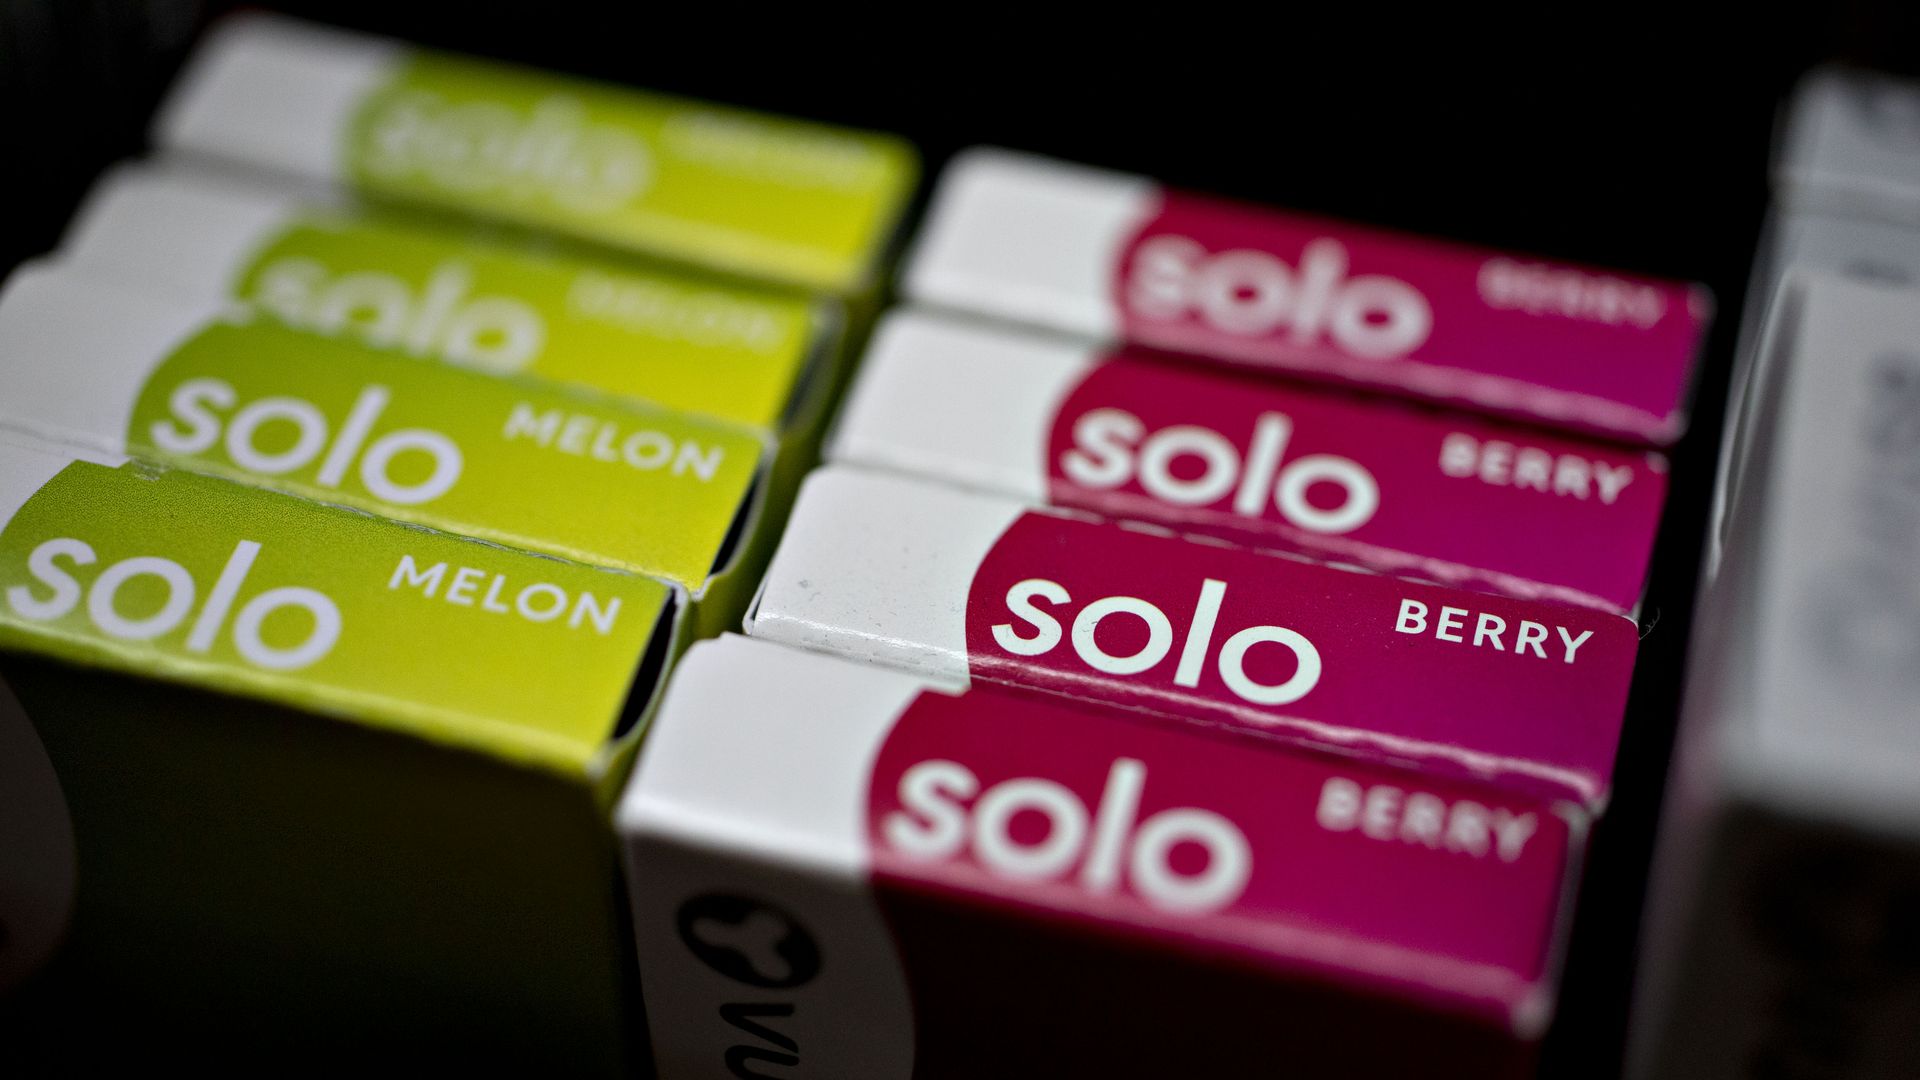 green and pink colored flavored nicotine cartridges read Melon and berry on a store shelf. 